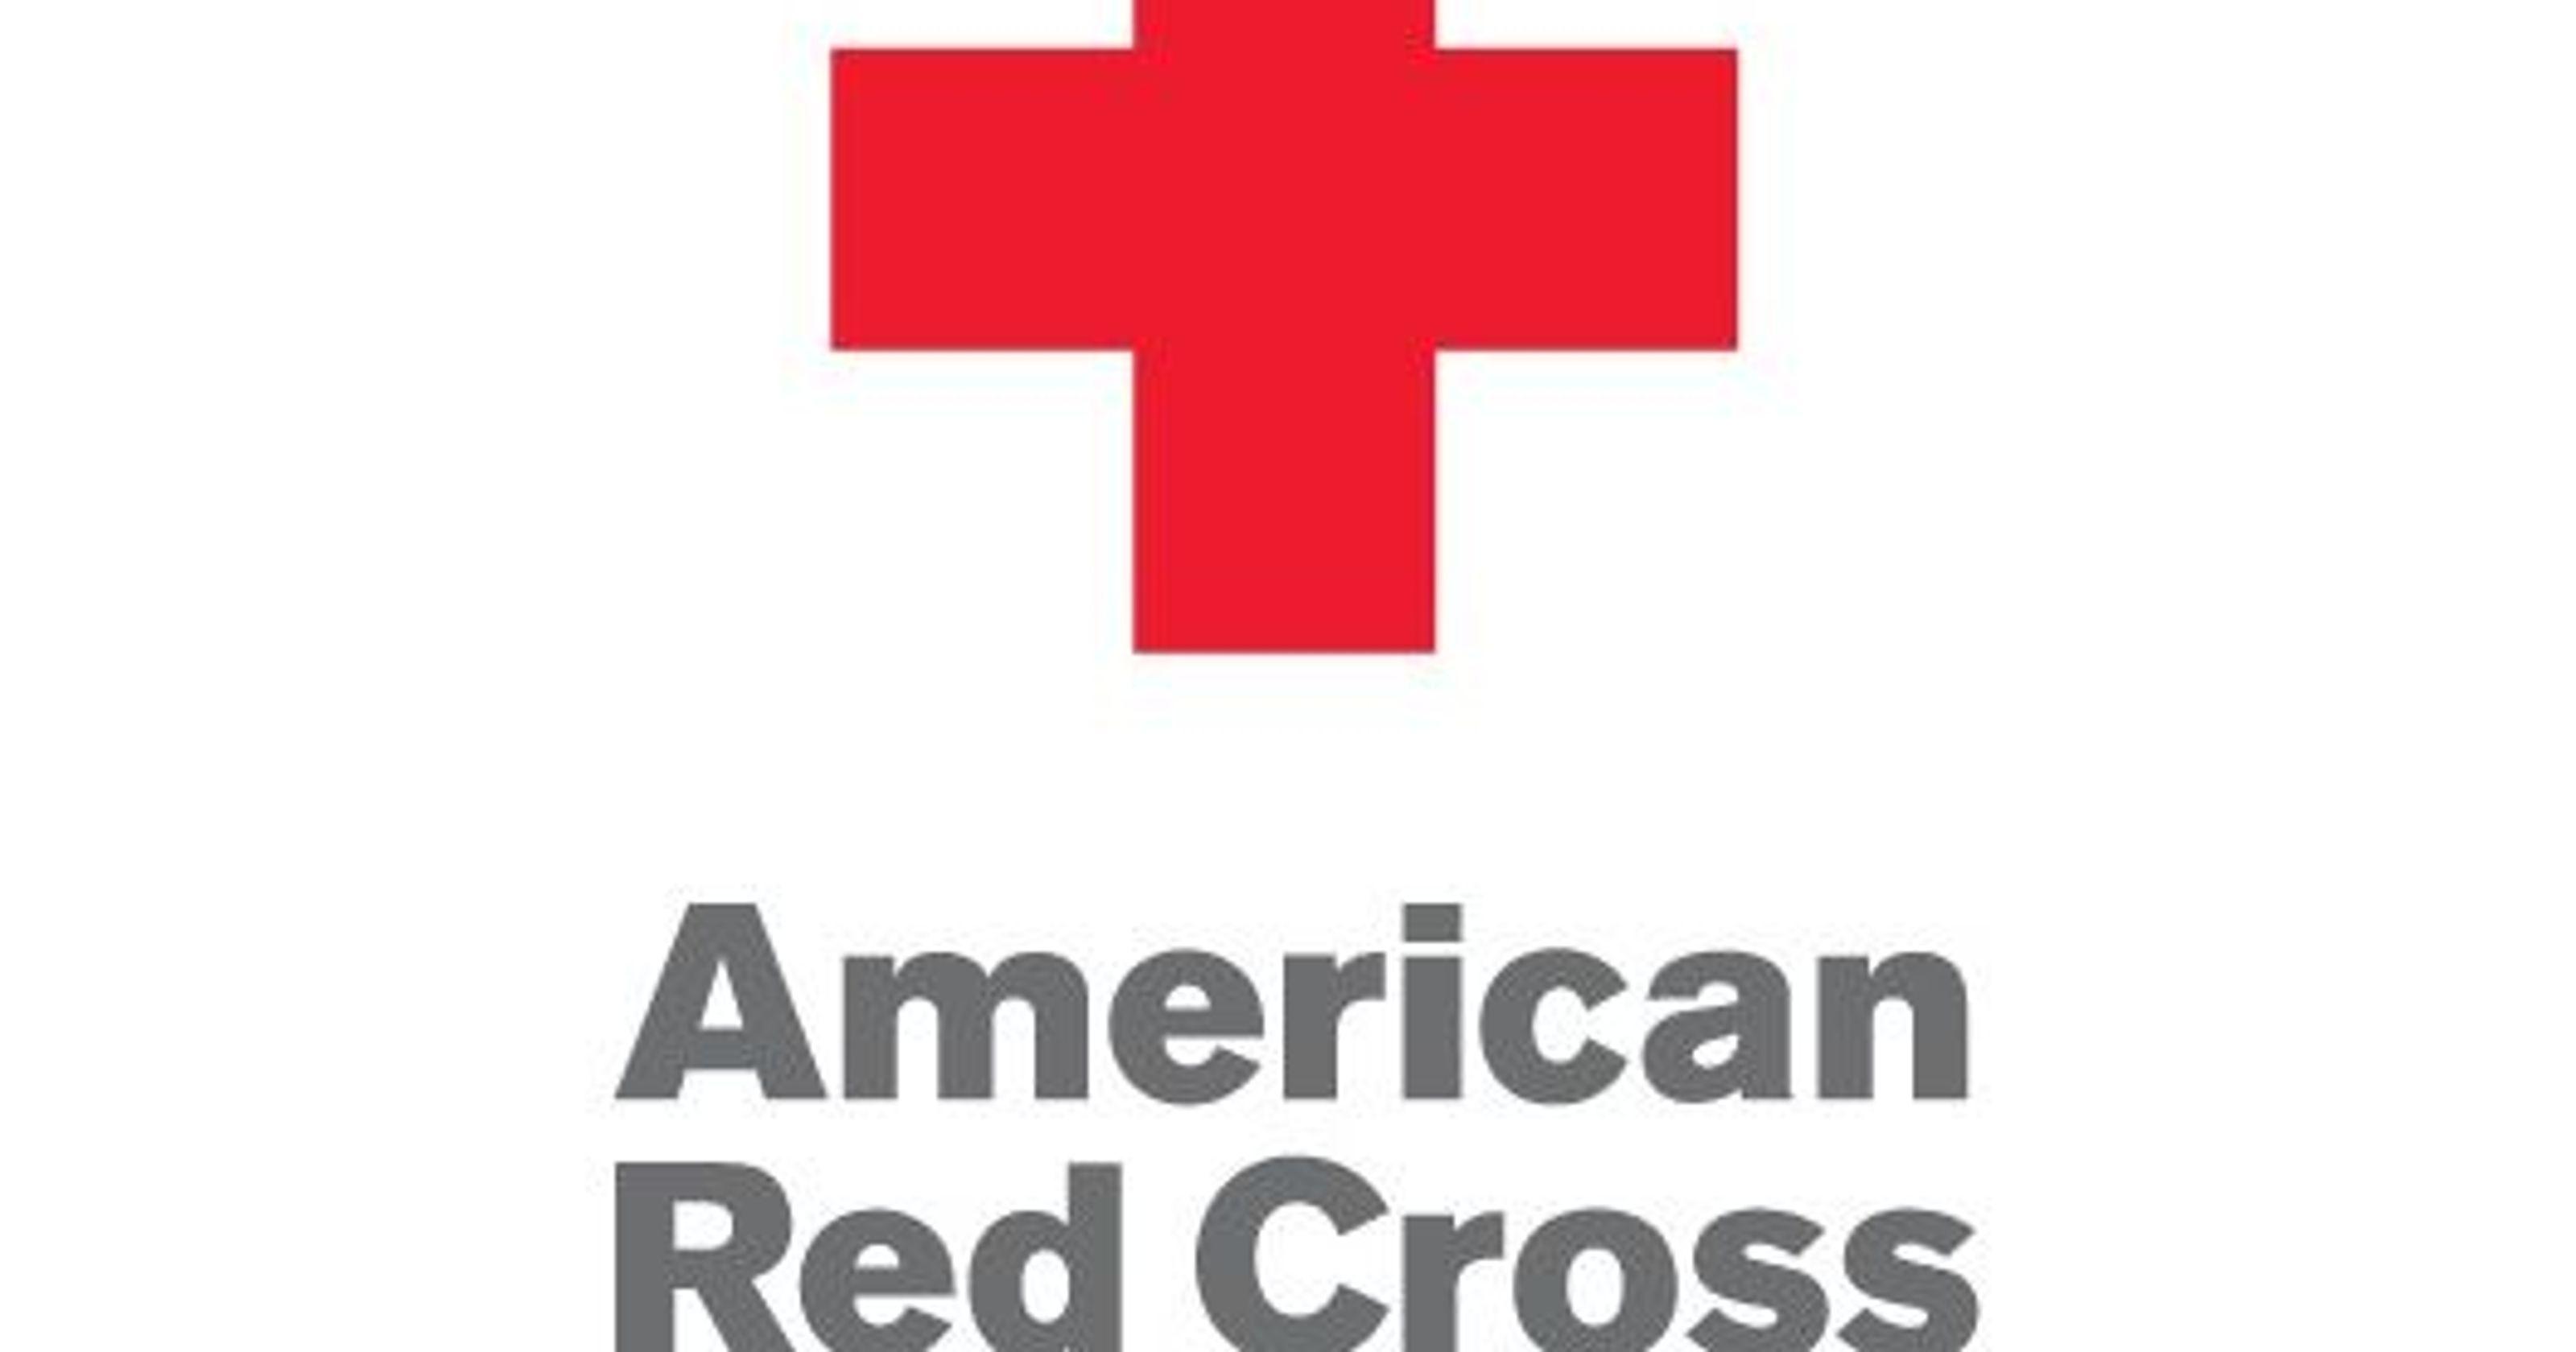 Classic American Red Cross Logo - Donations sought for service project